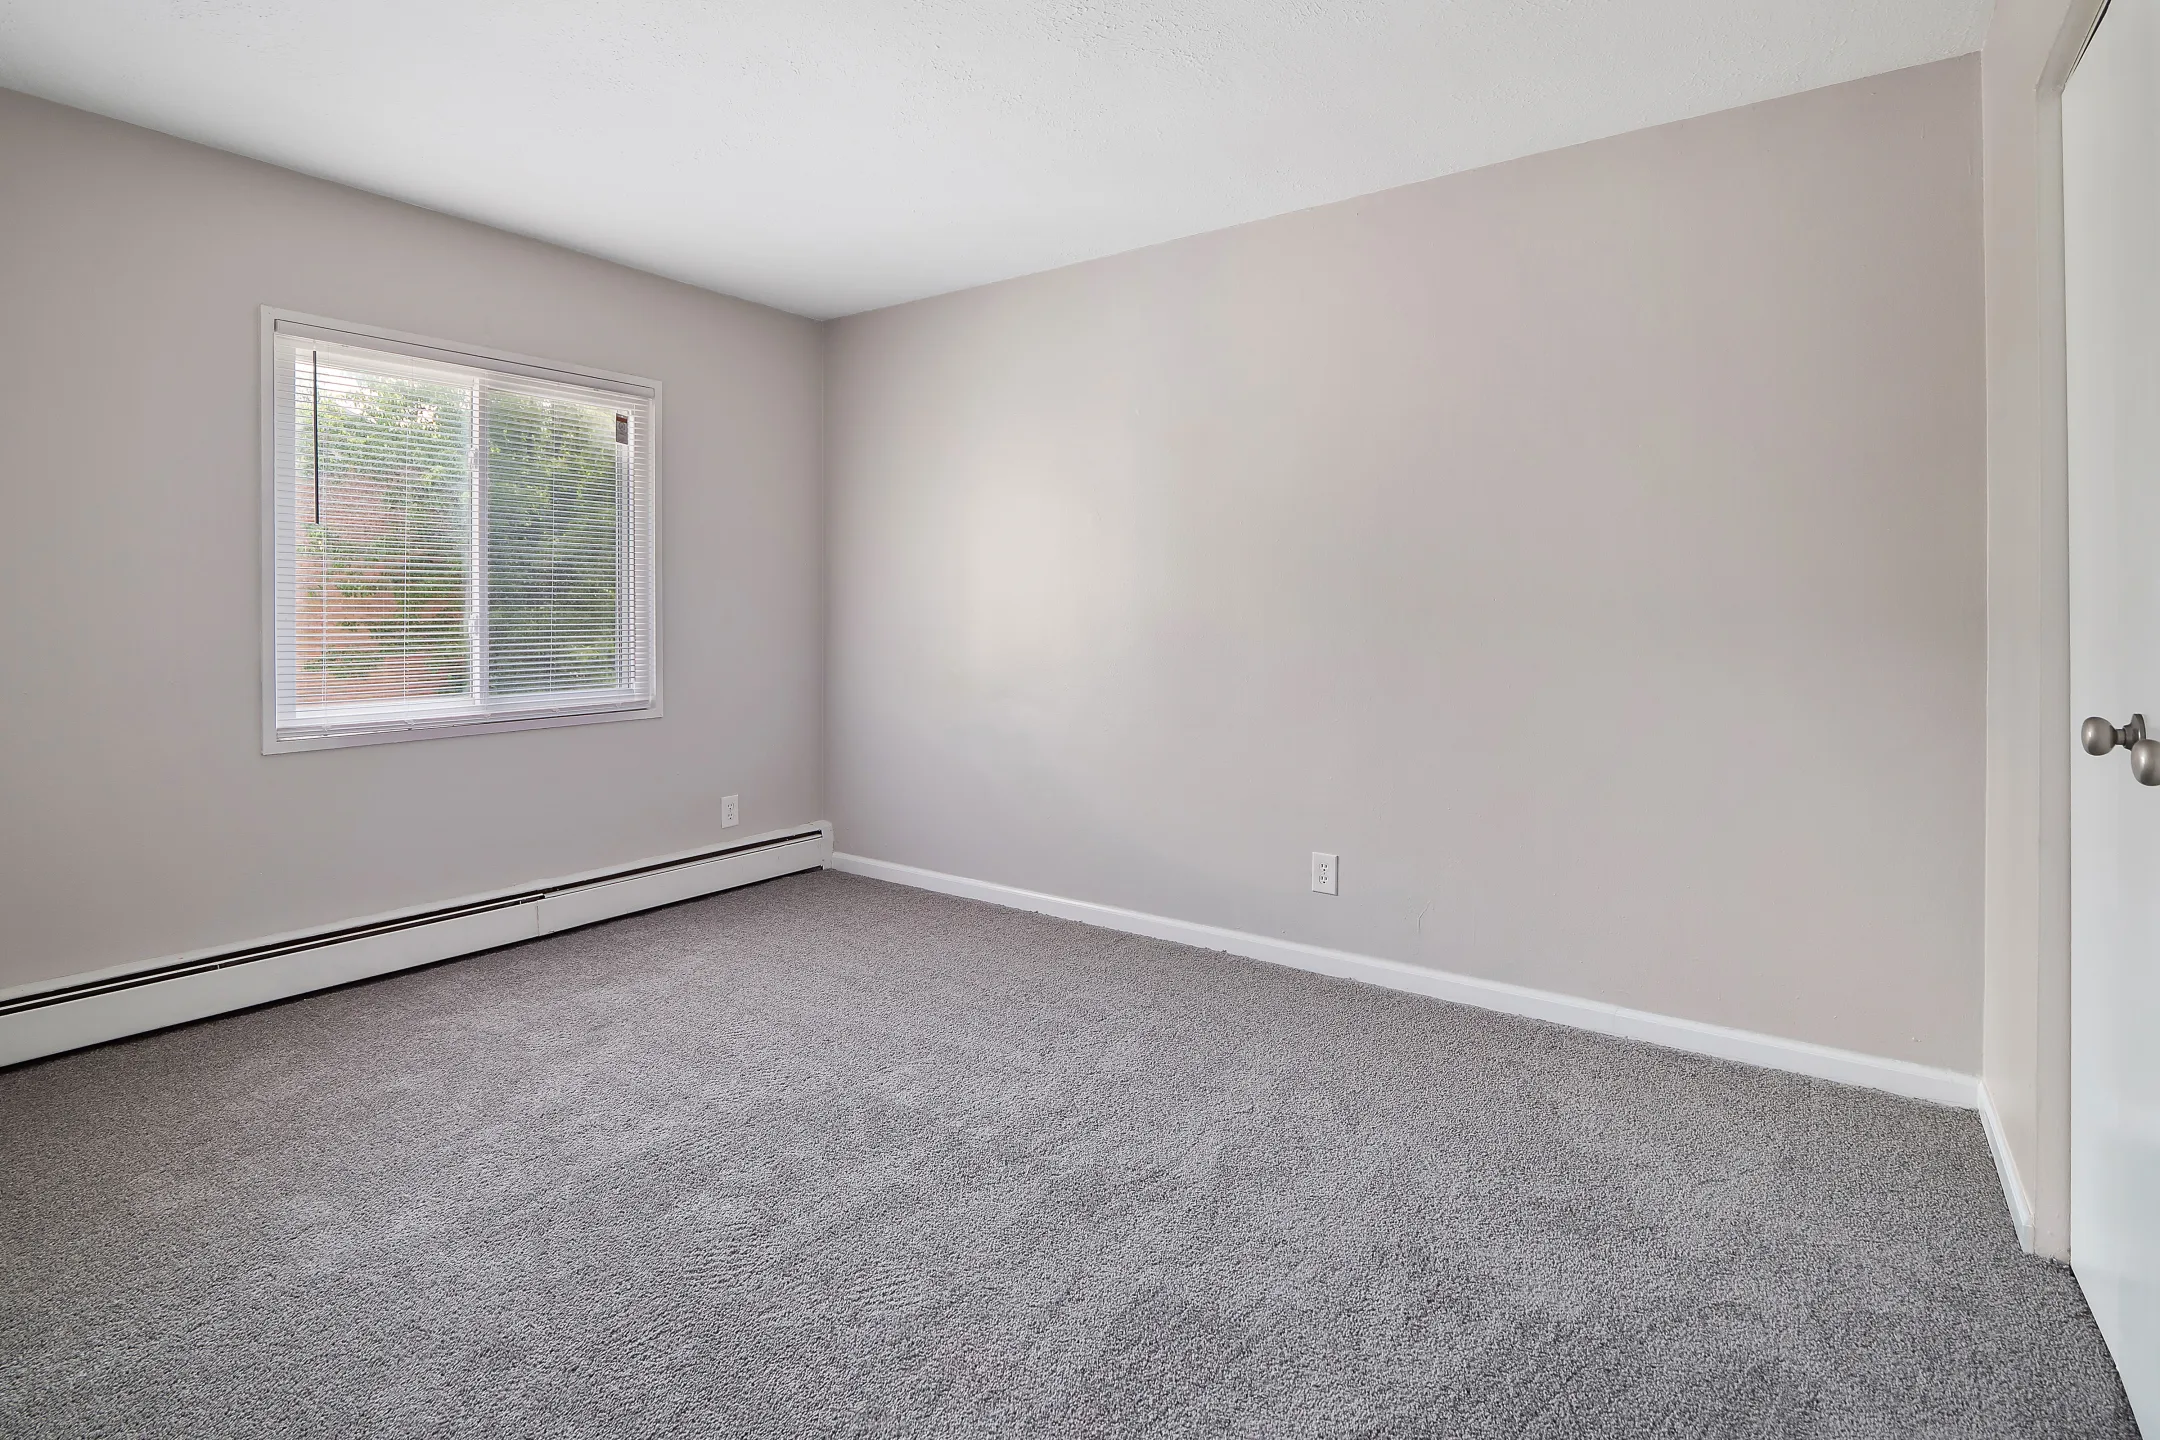 Bedroom - Concord Townhomes - Mentor, OH